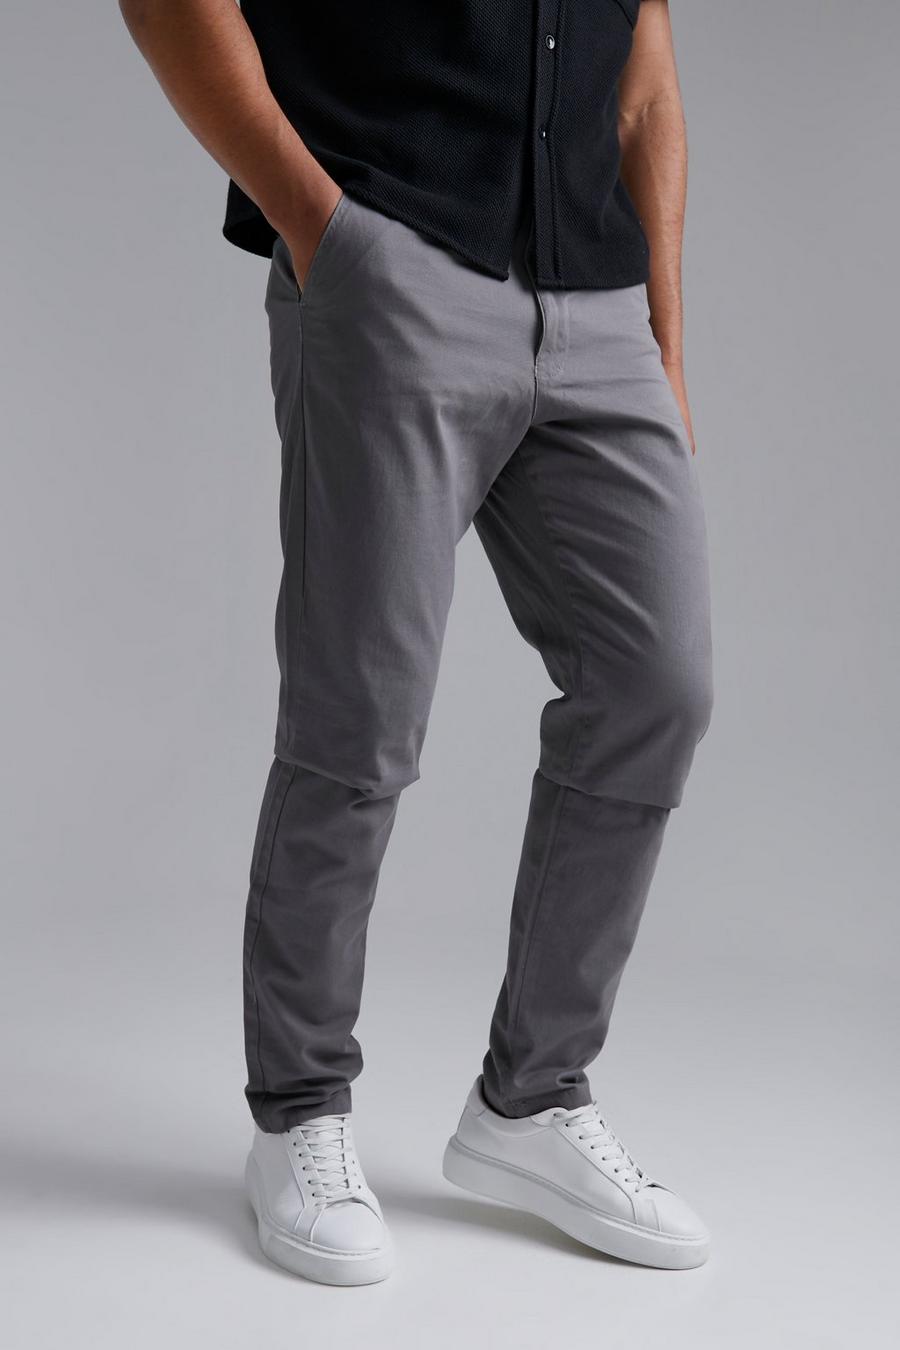 Charcoal gris Tall Slim Fit Chino Trousers